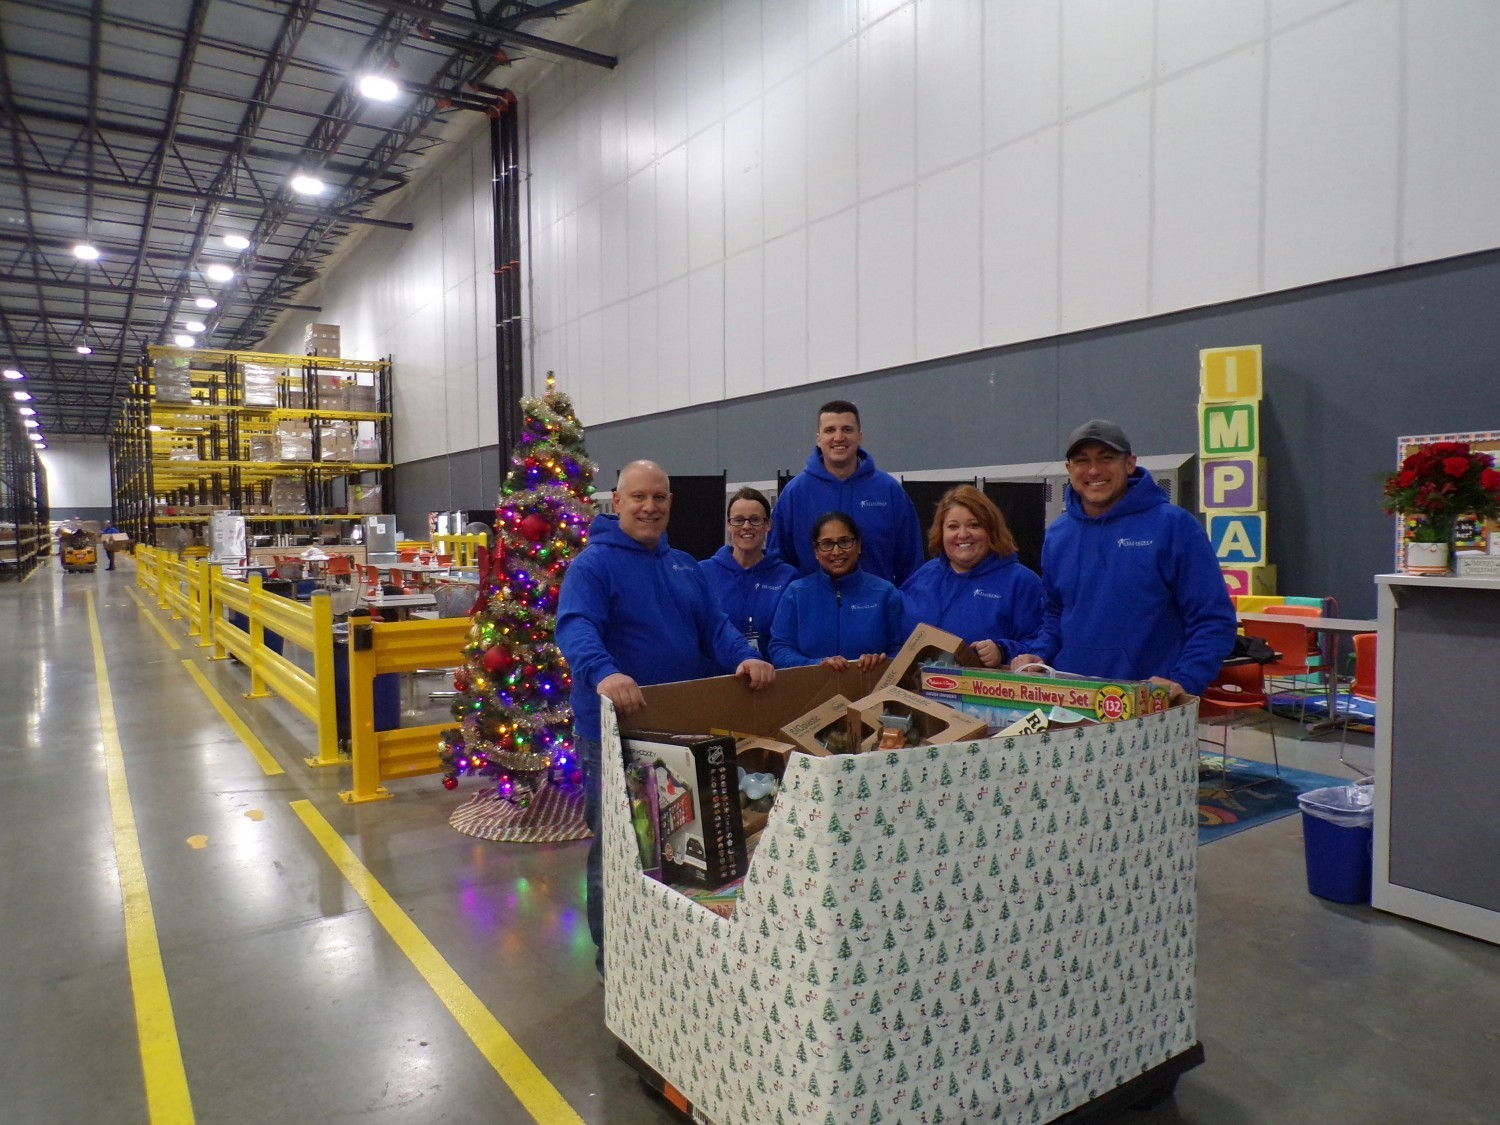 Employees truly embraced the spirit of giving during the holiday season contributing 108 toys to Toys for Tots.